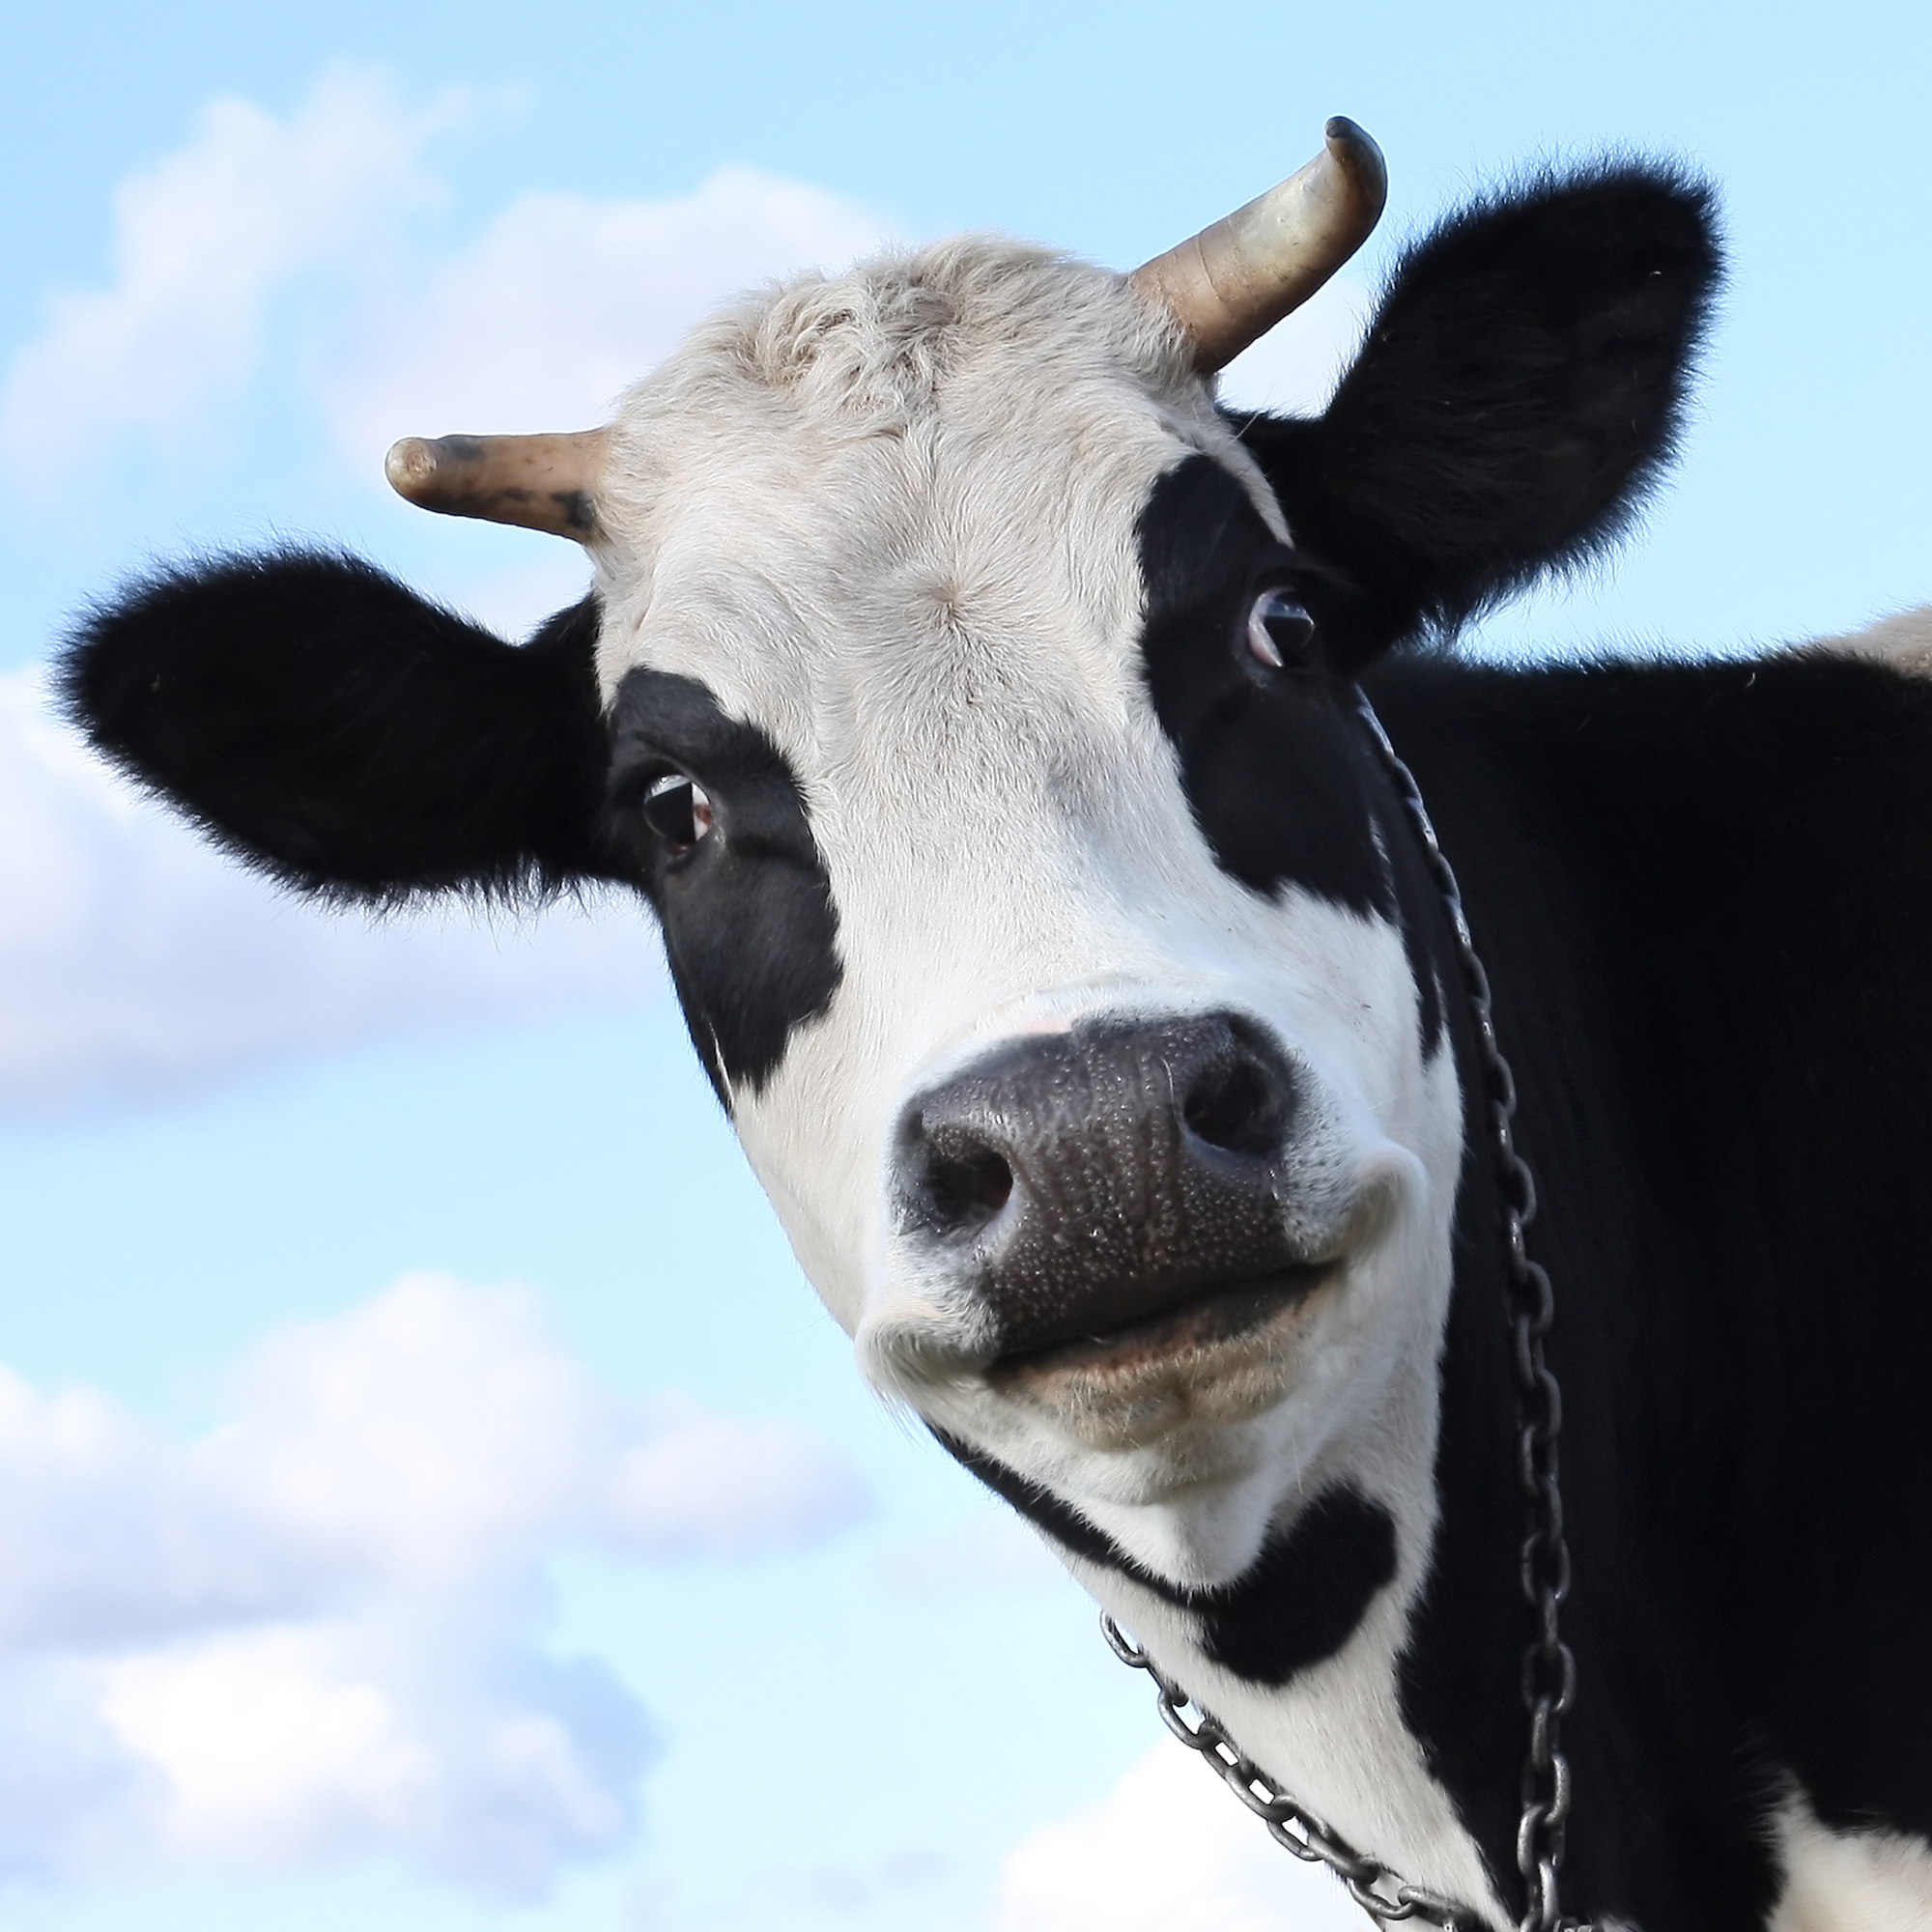 Smiling dairy cow